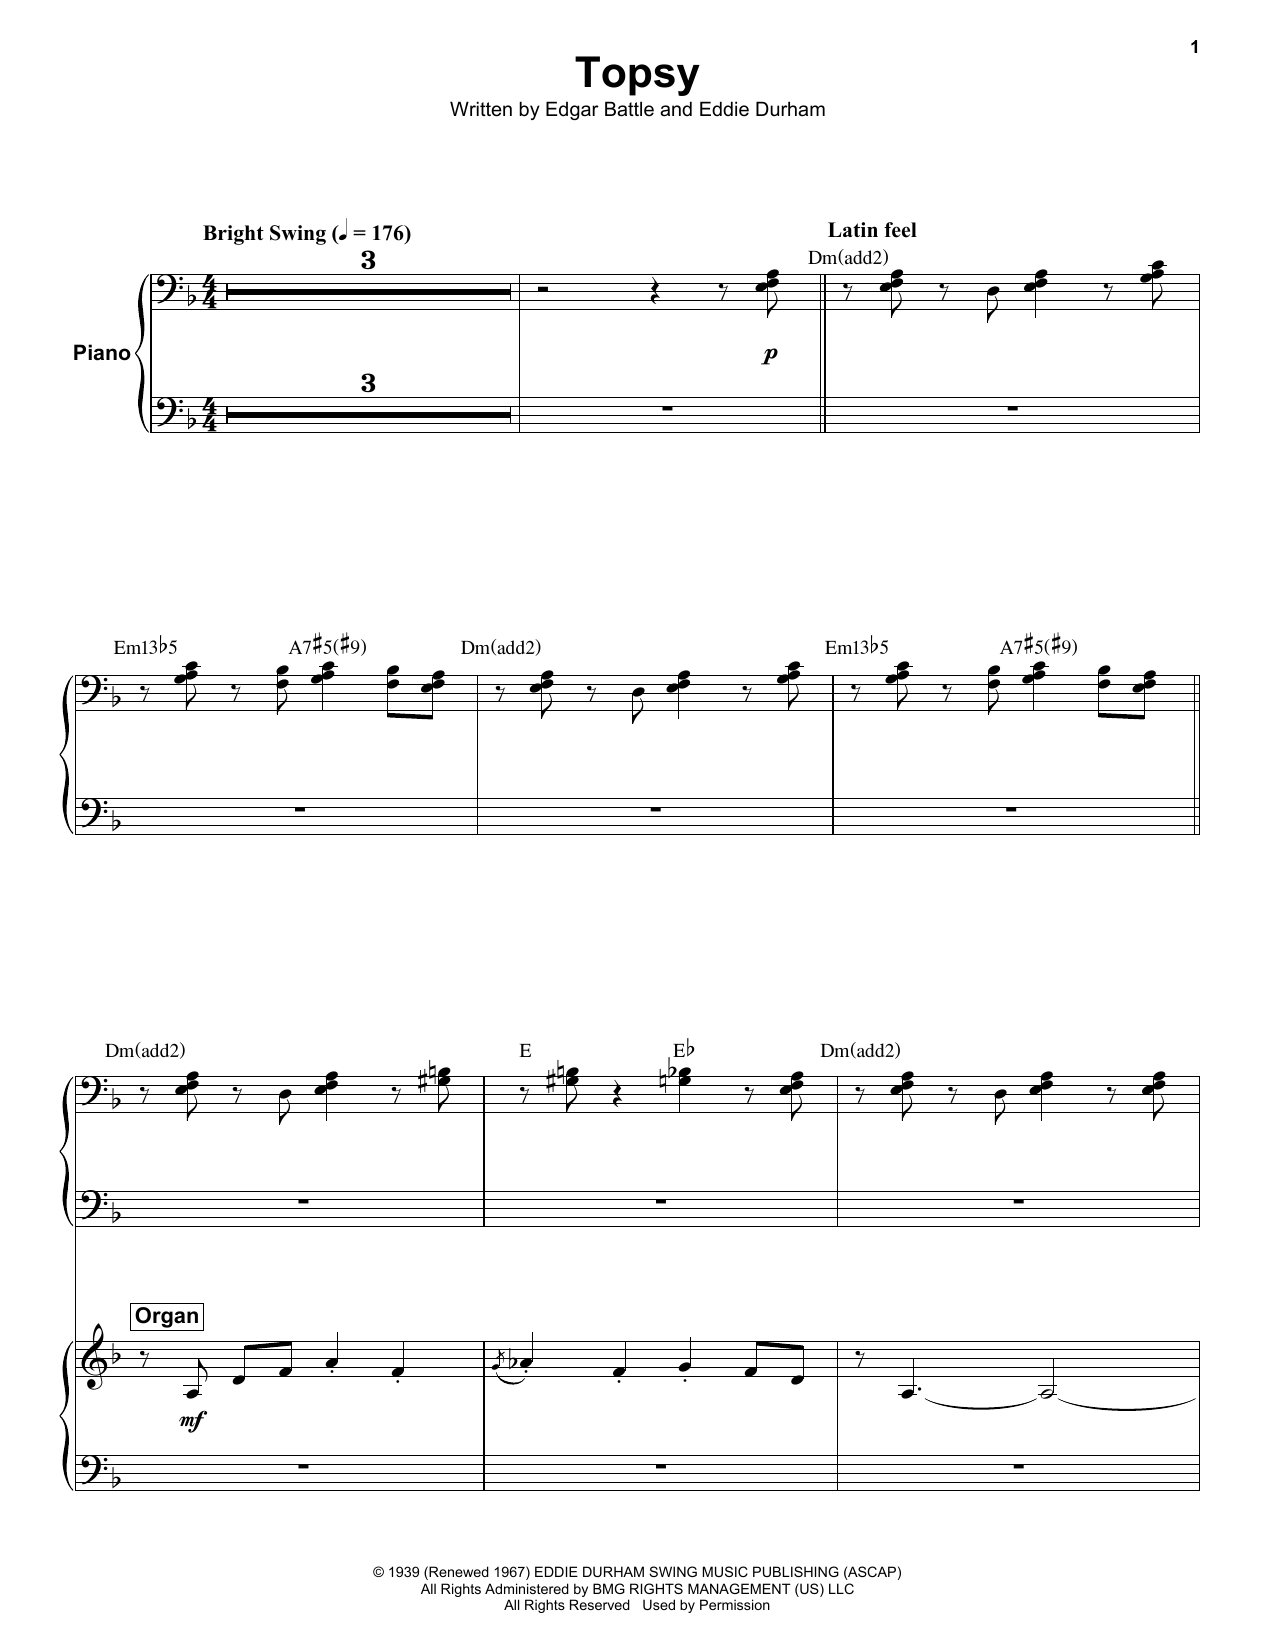 Download Cozy Cole Topsy Sheet Music